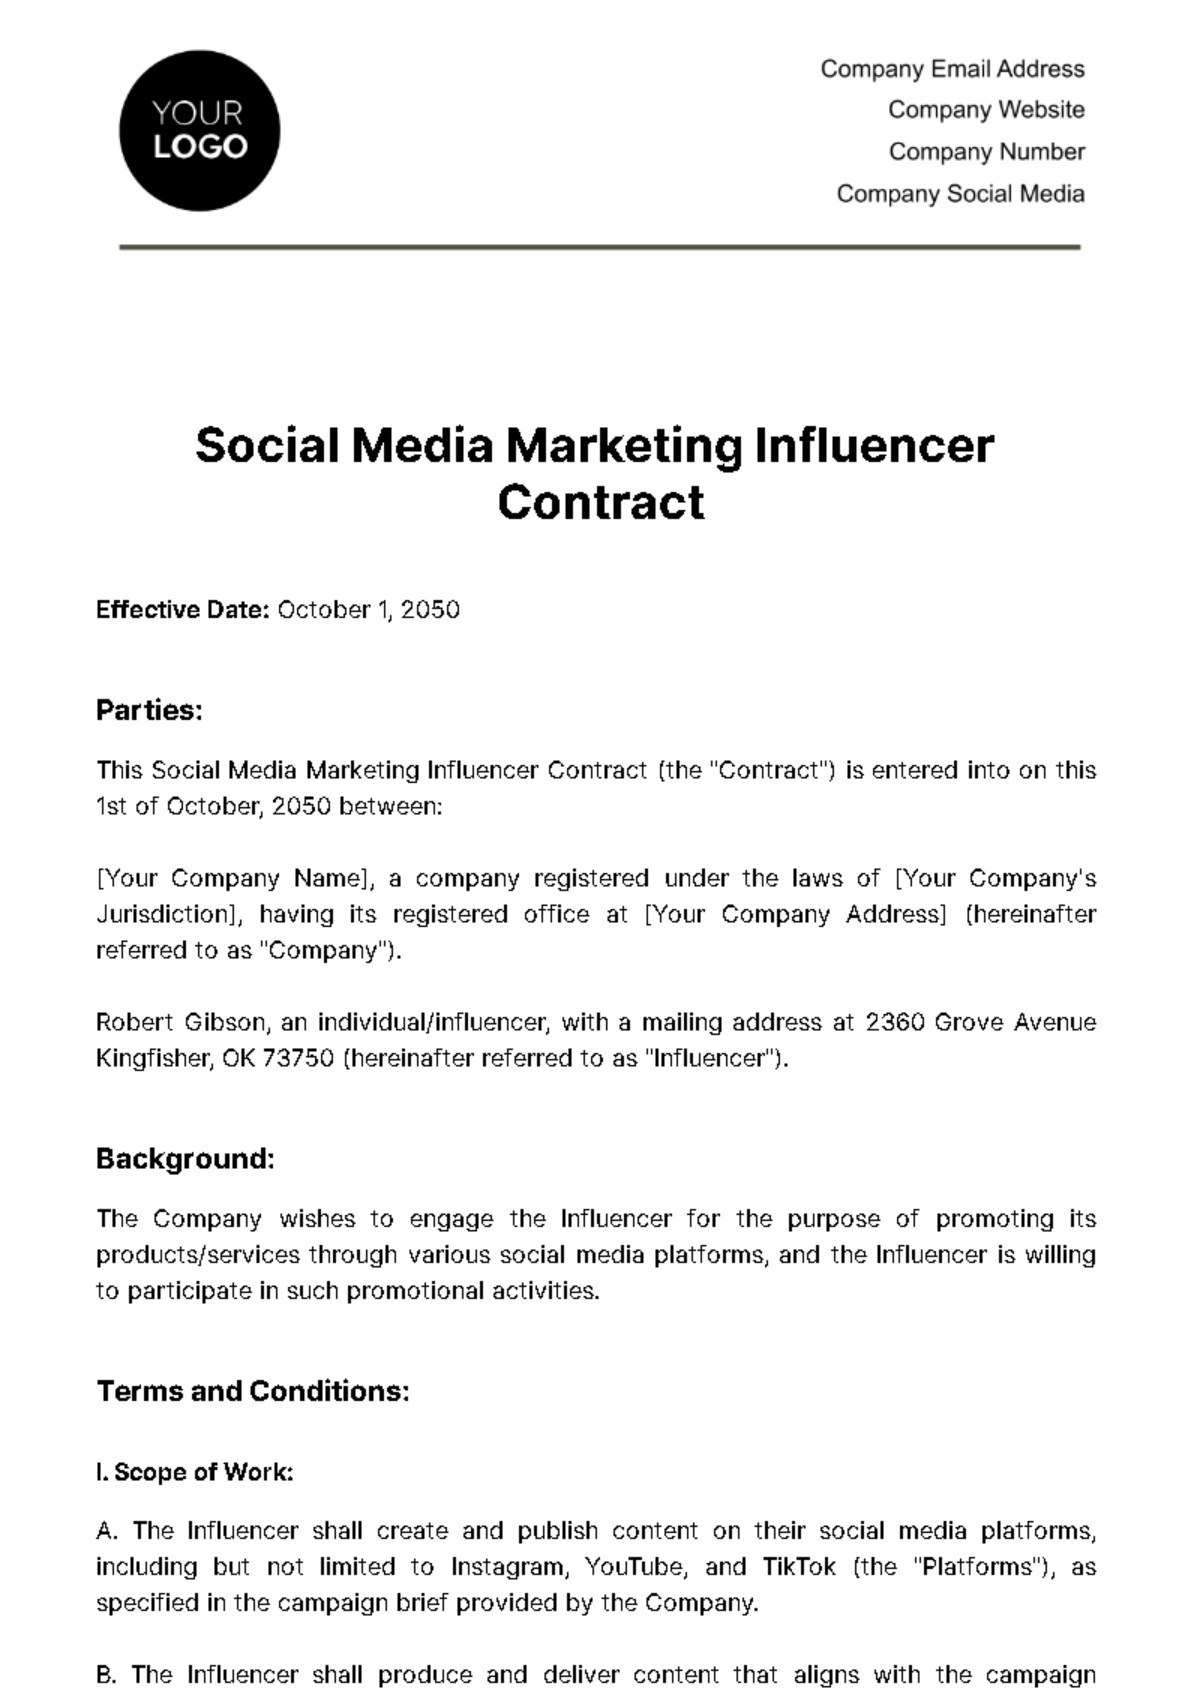 Free Social Media Marketing Influencer Contract Template